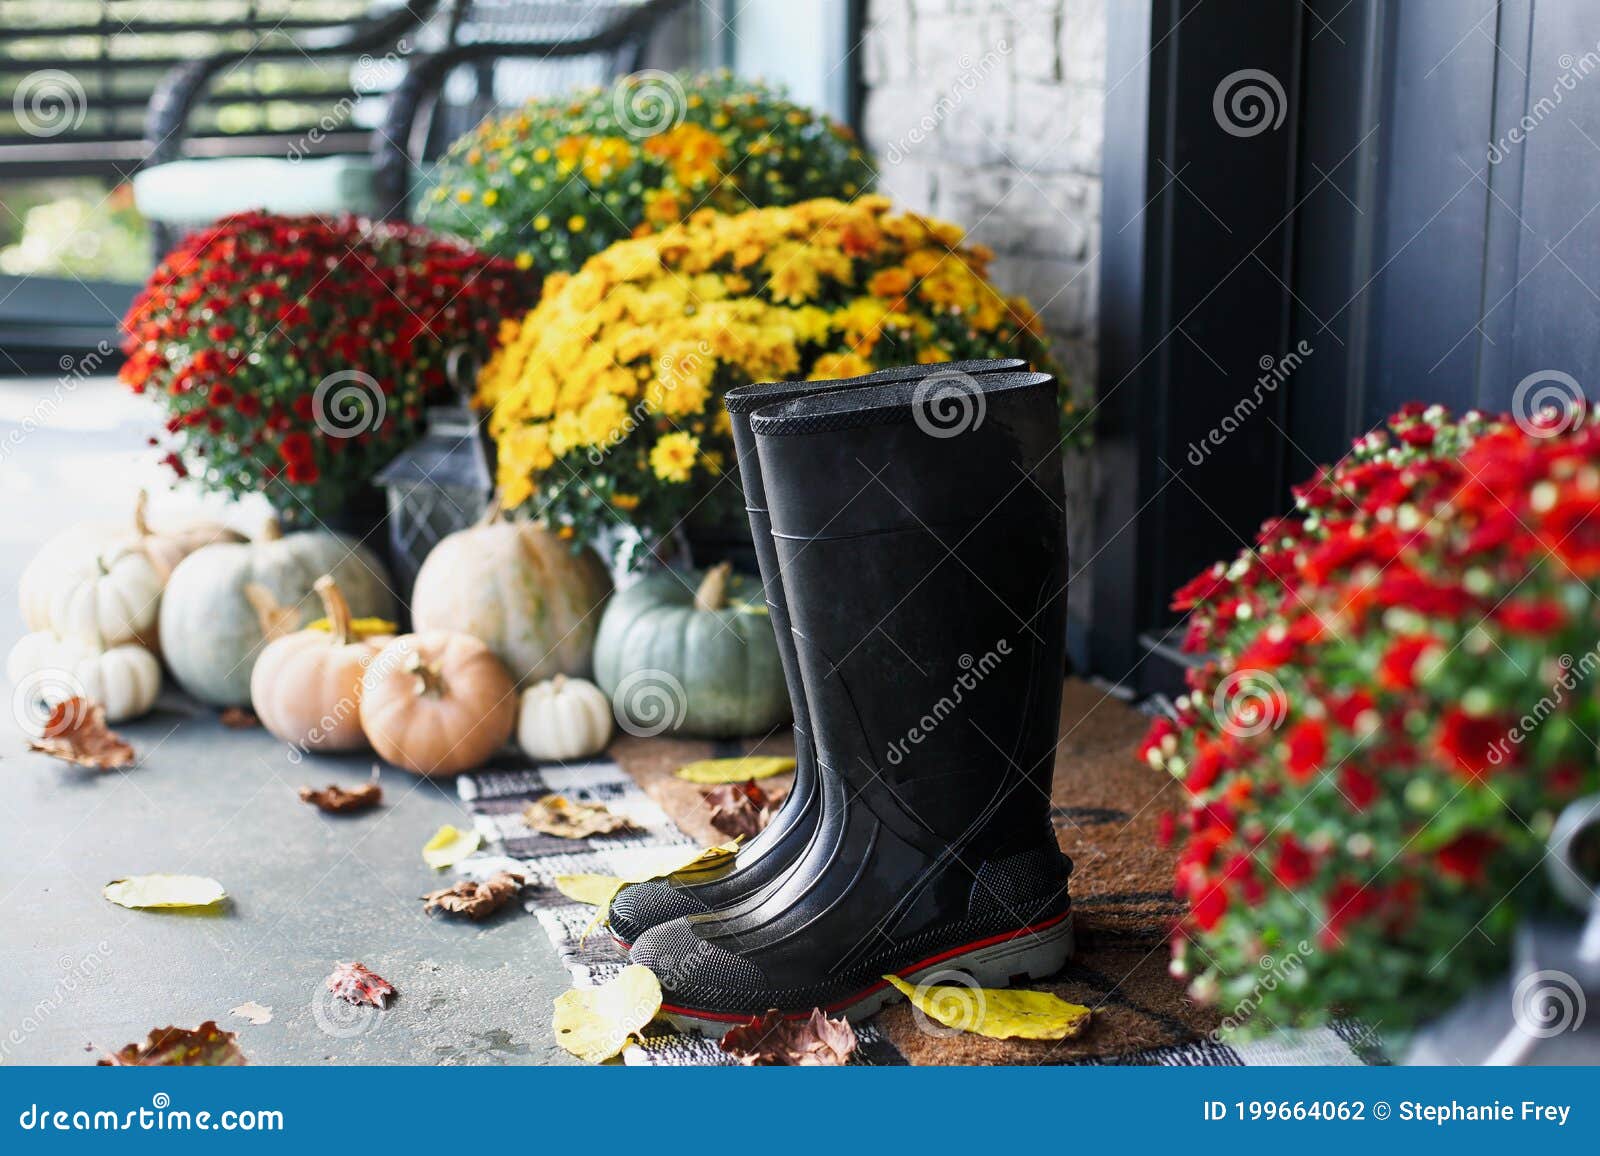 rain boots on front porch decorated for autumn